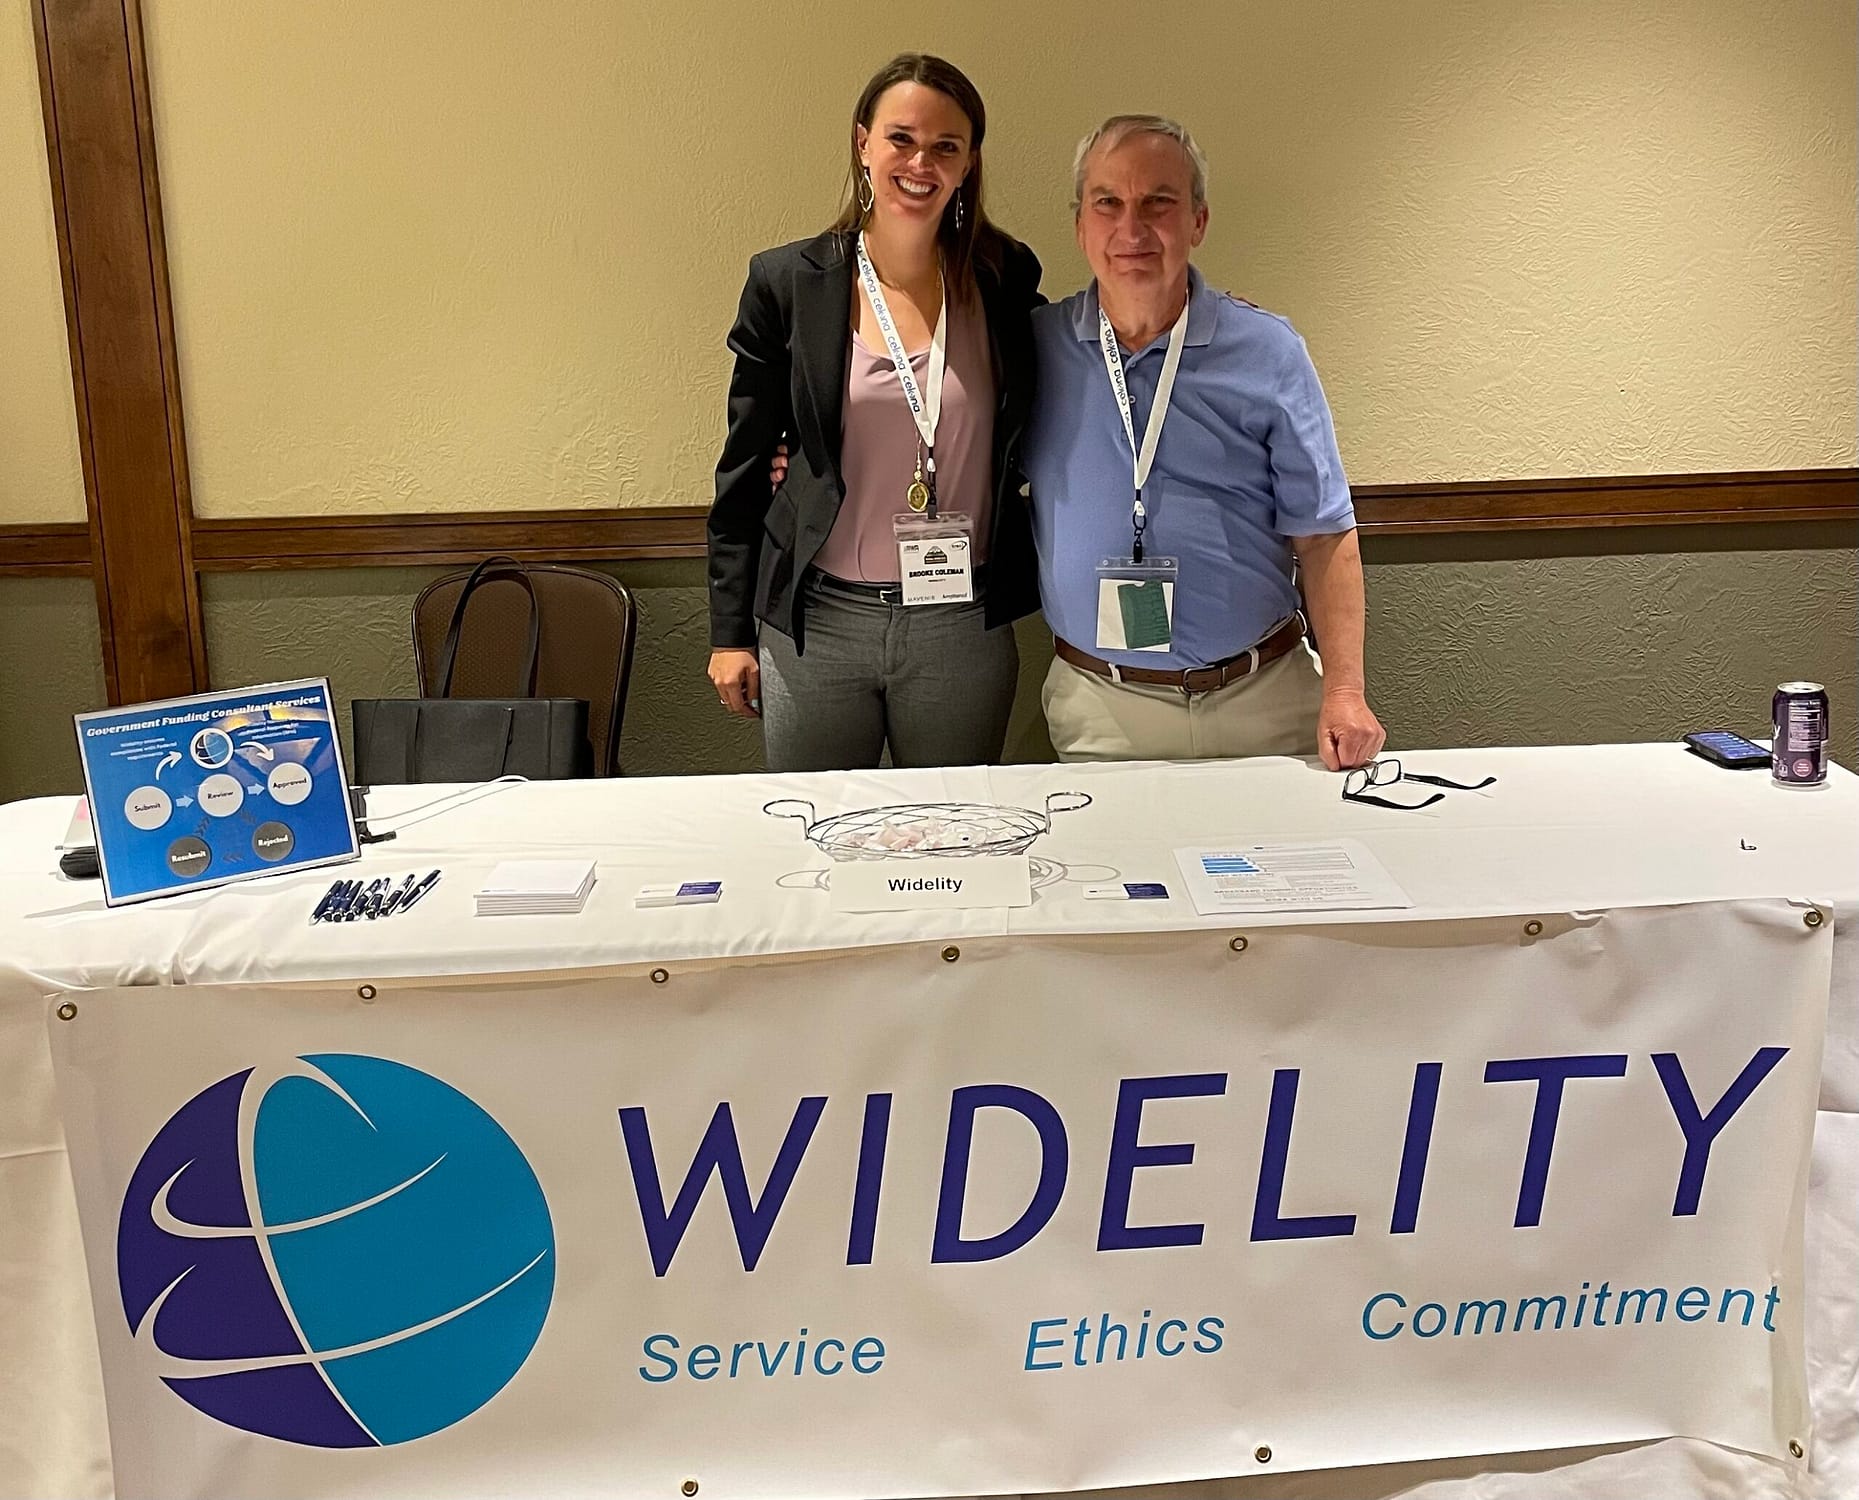 Mike Lasky and Brooke Coleman at the Widelity table for RWA Summit 2022